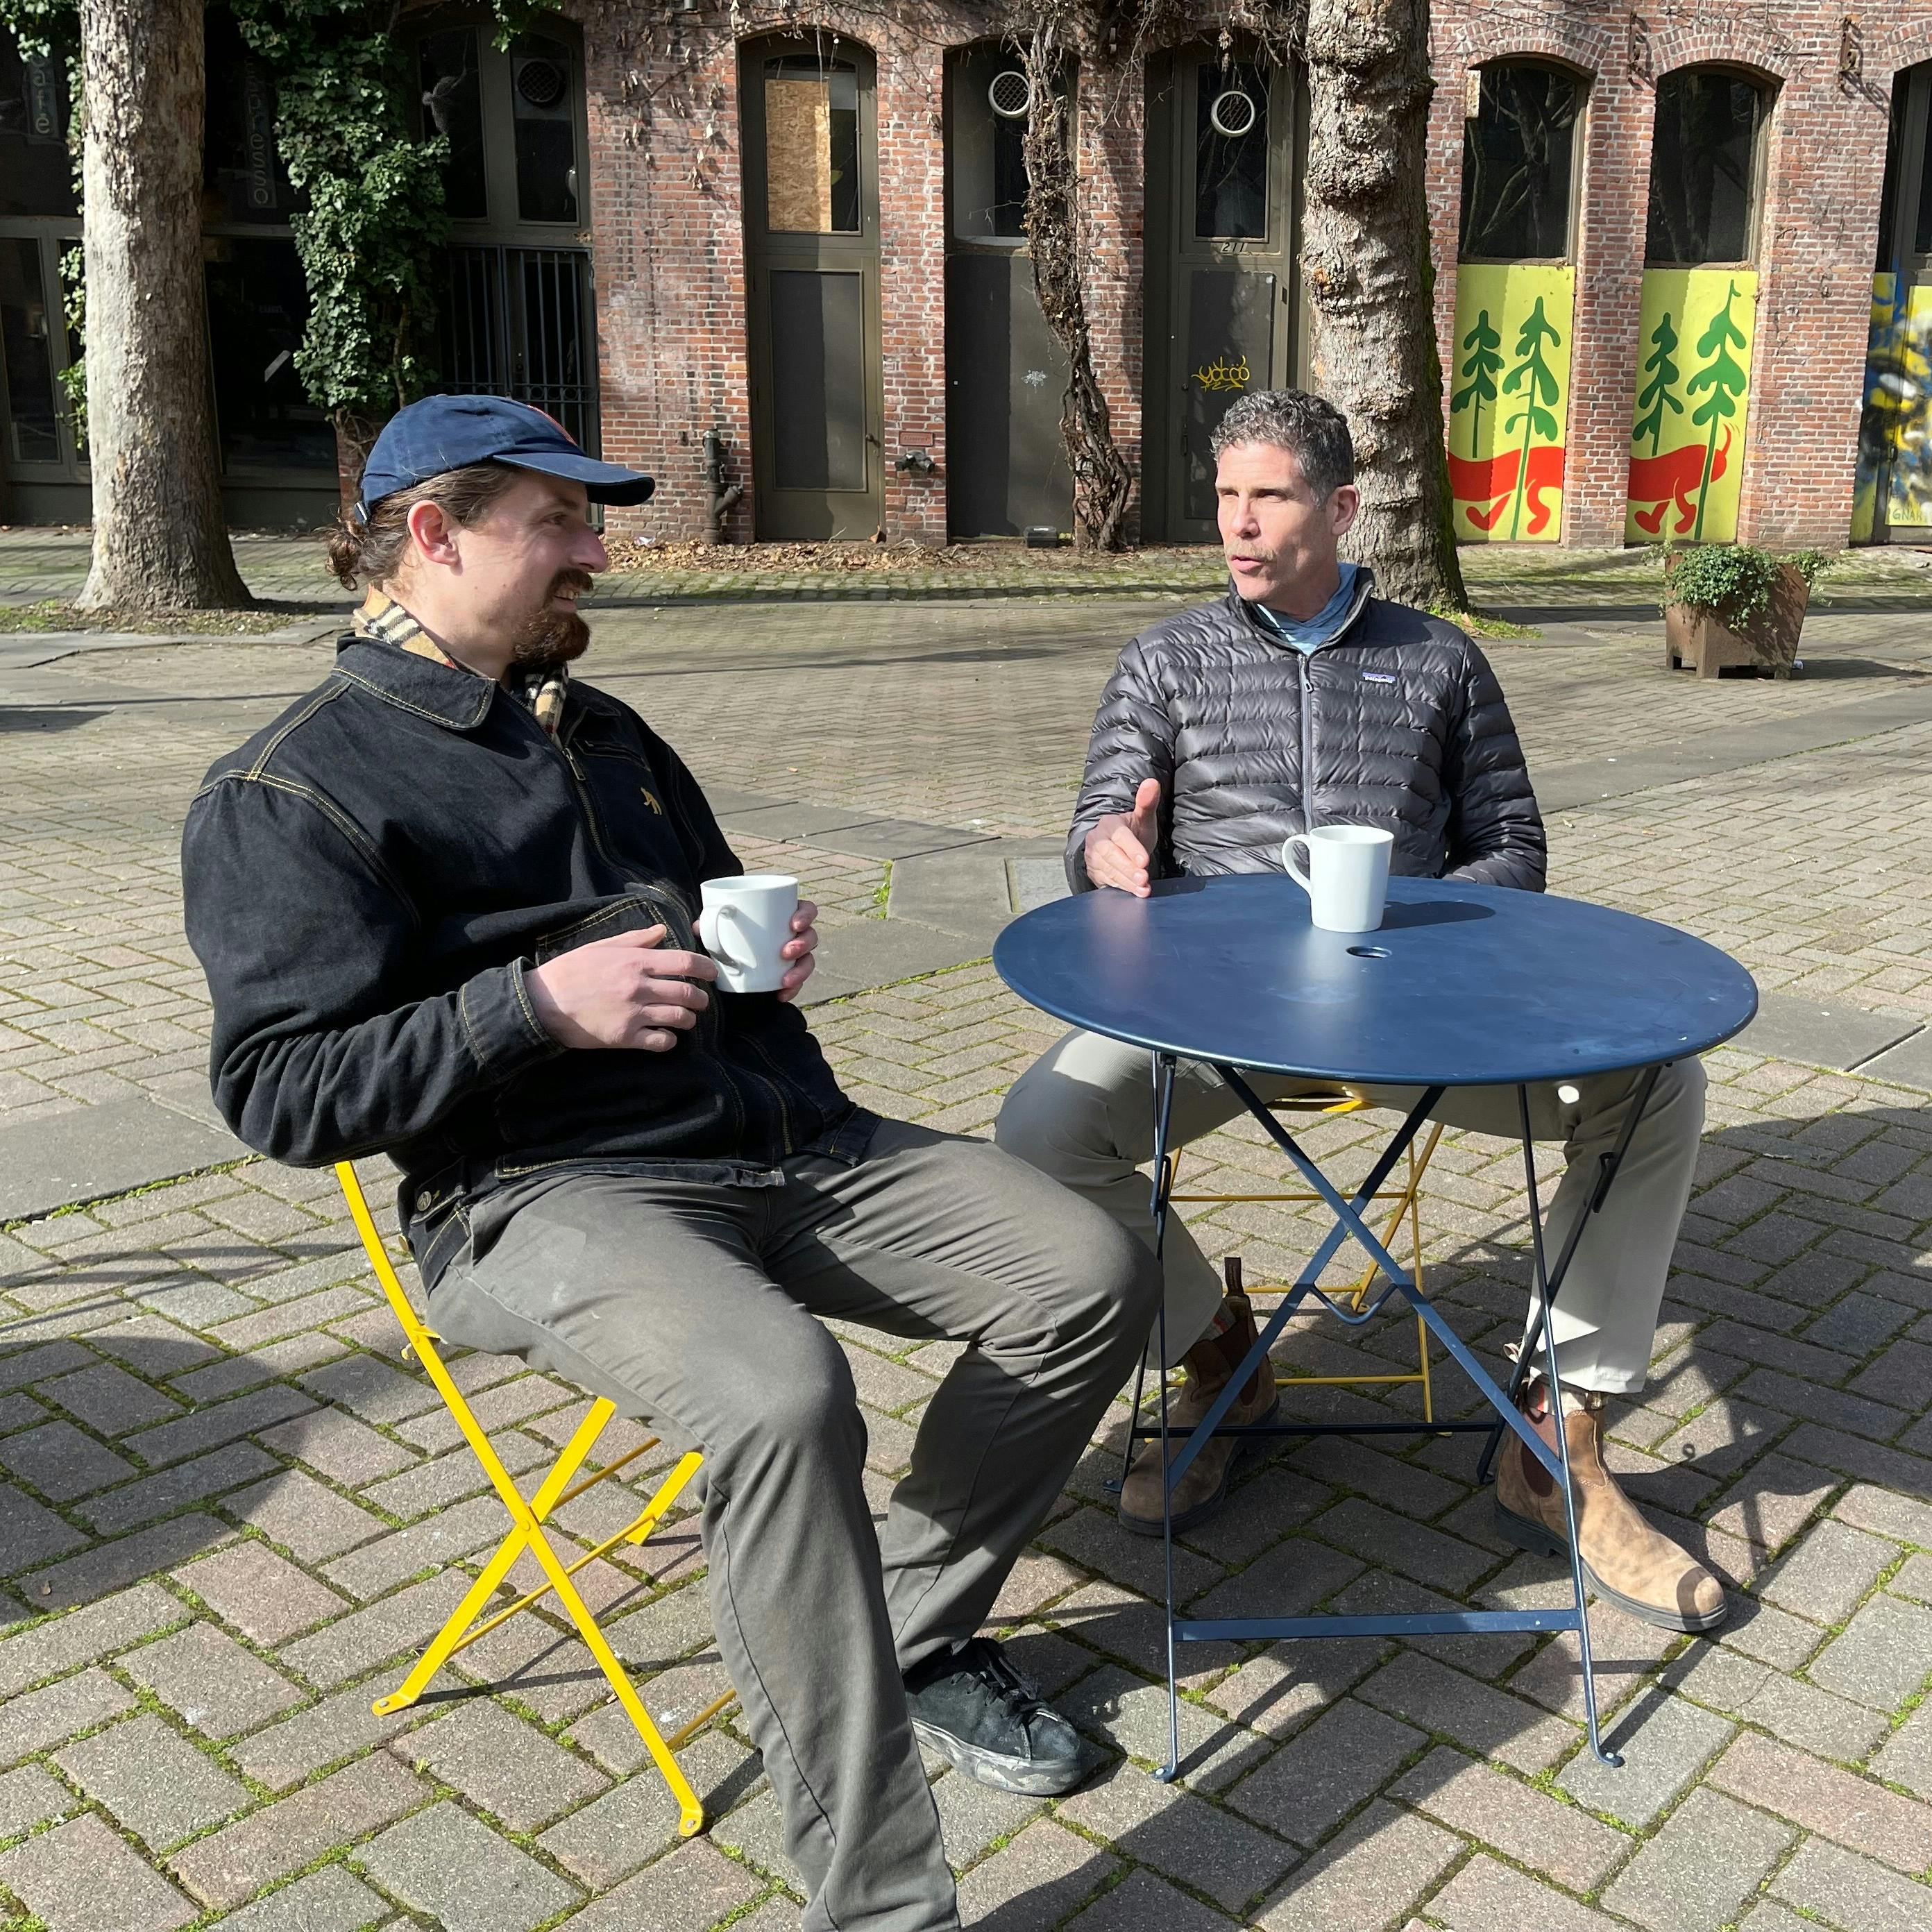 Dr. Shlomo Freiman and Tobias Coughlin-Bogue enjoying a coffee and a chat at a cafe table in a plaza on a sunny spring day